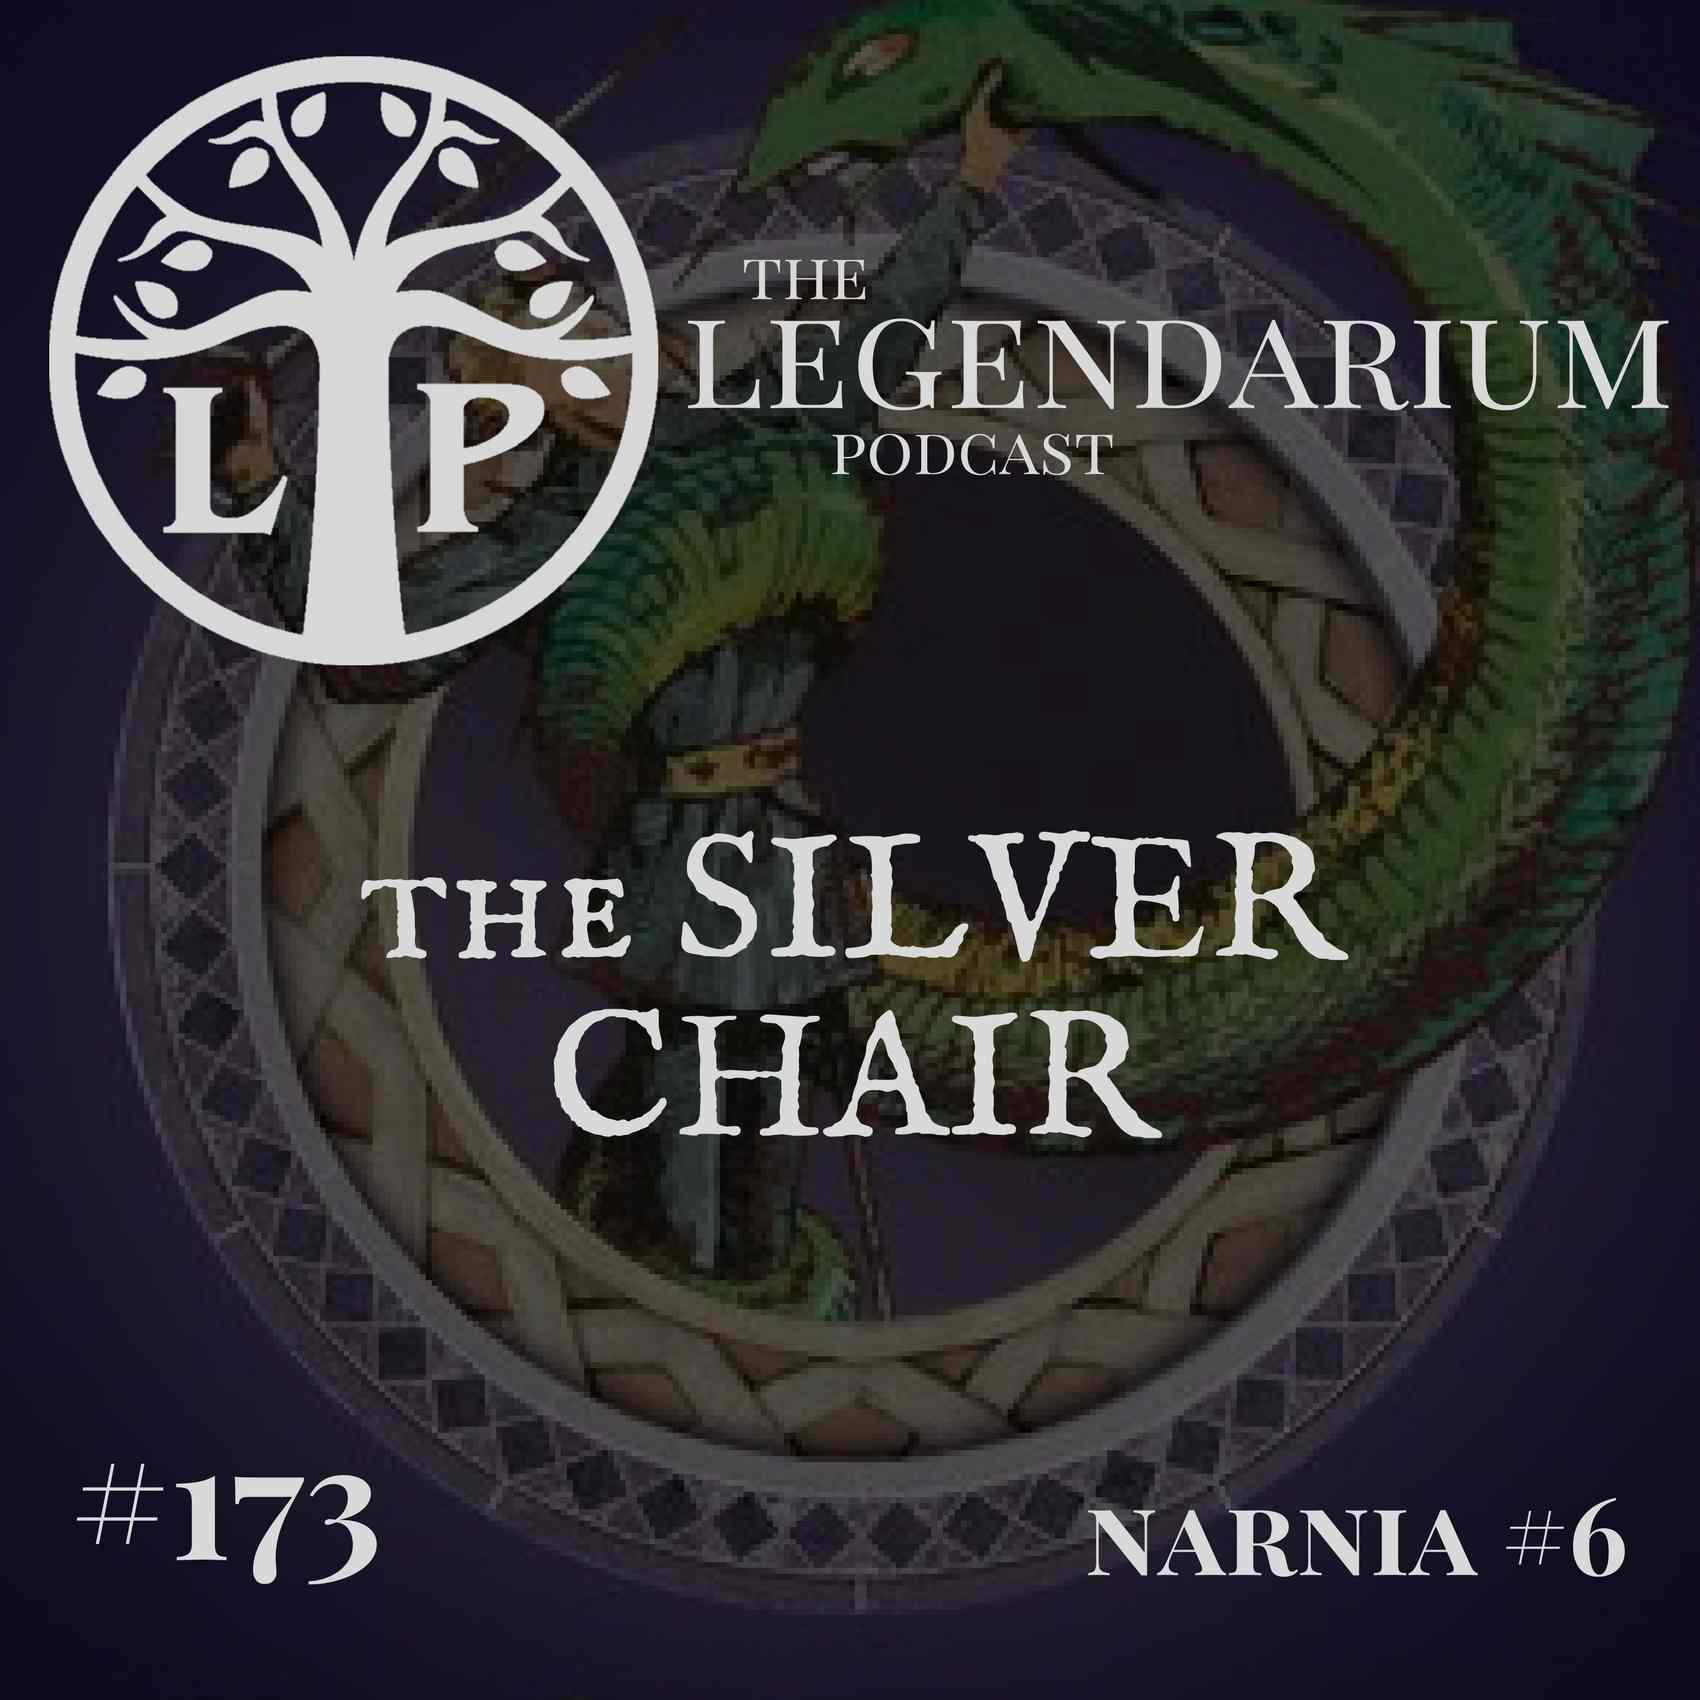 #173. The Silver Chair (Narnia #6)